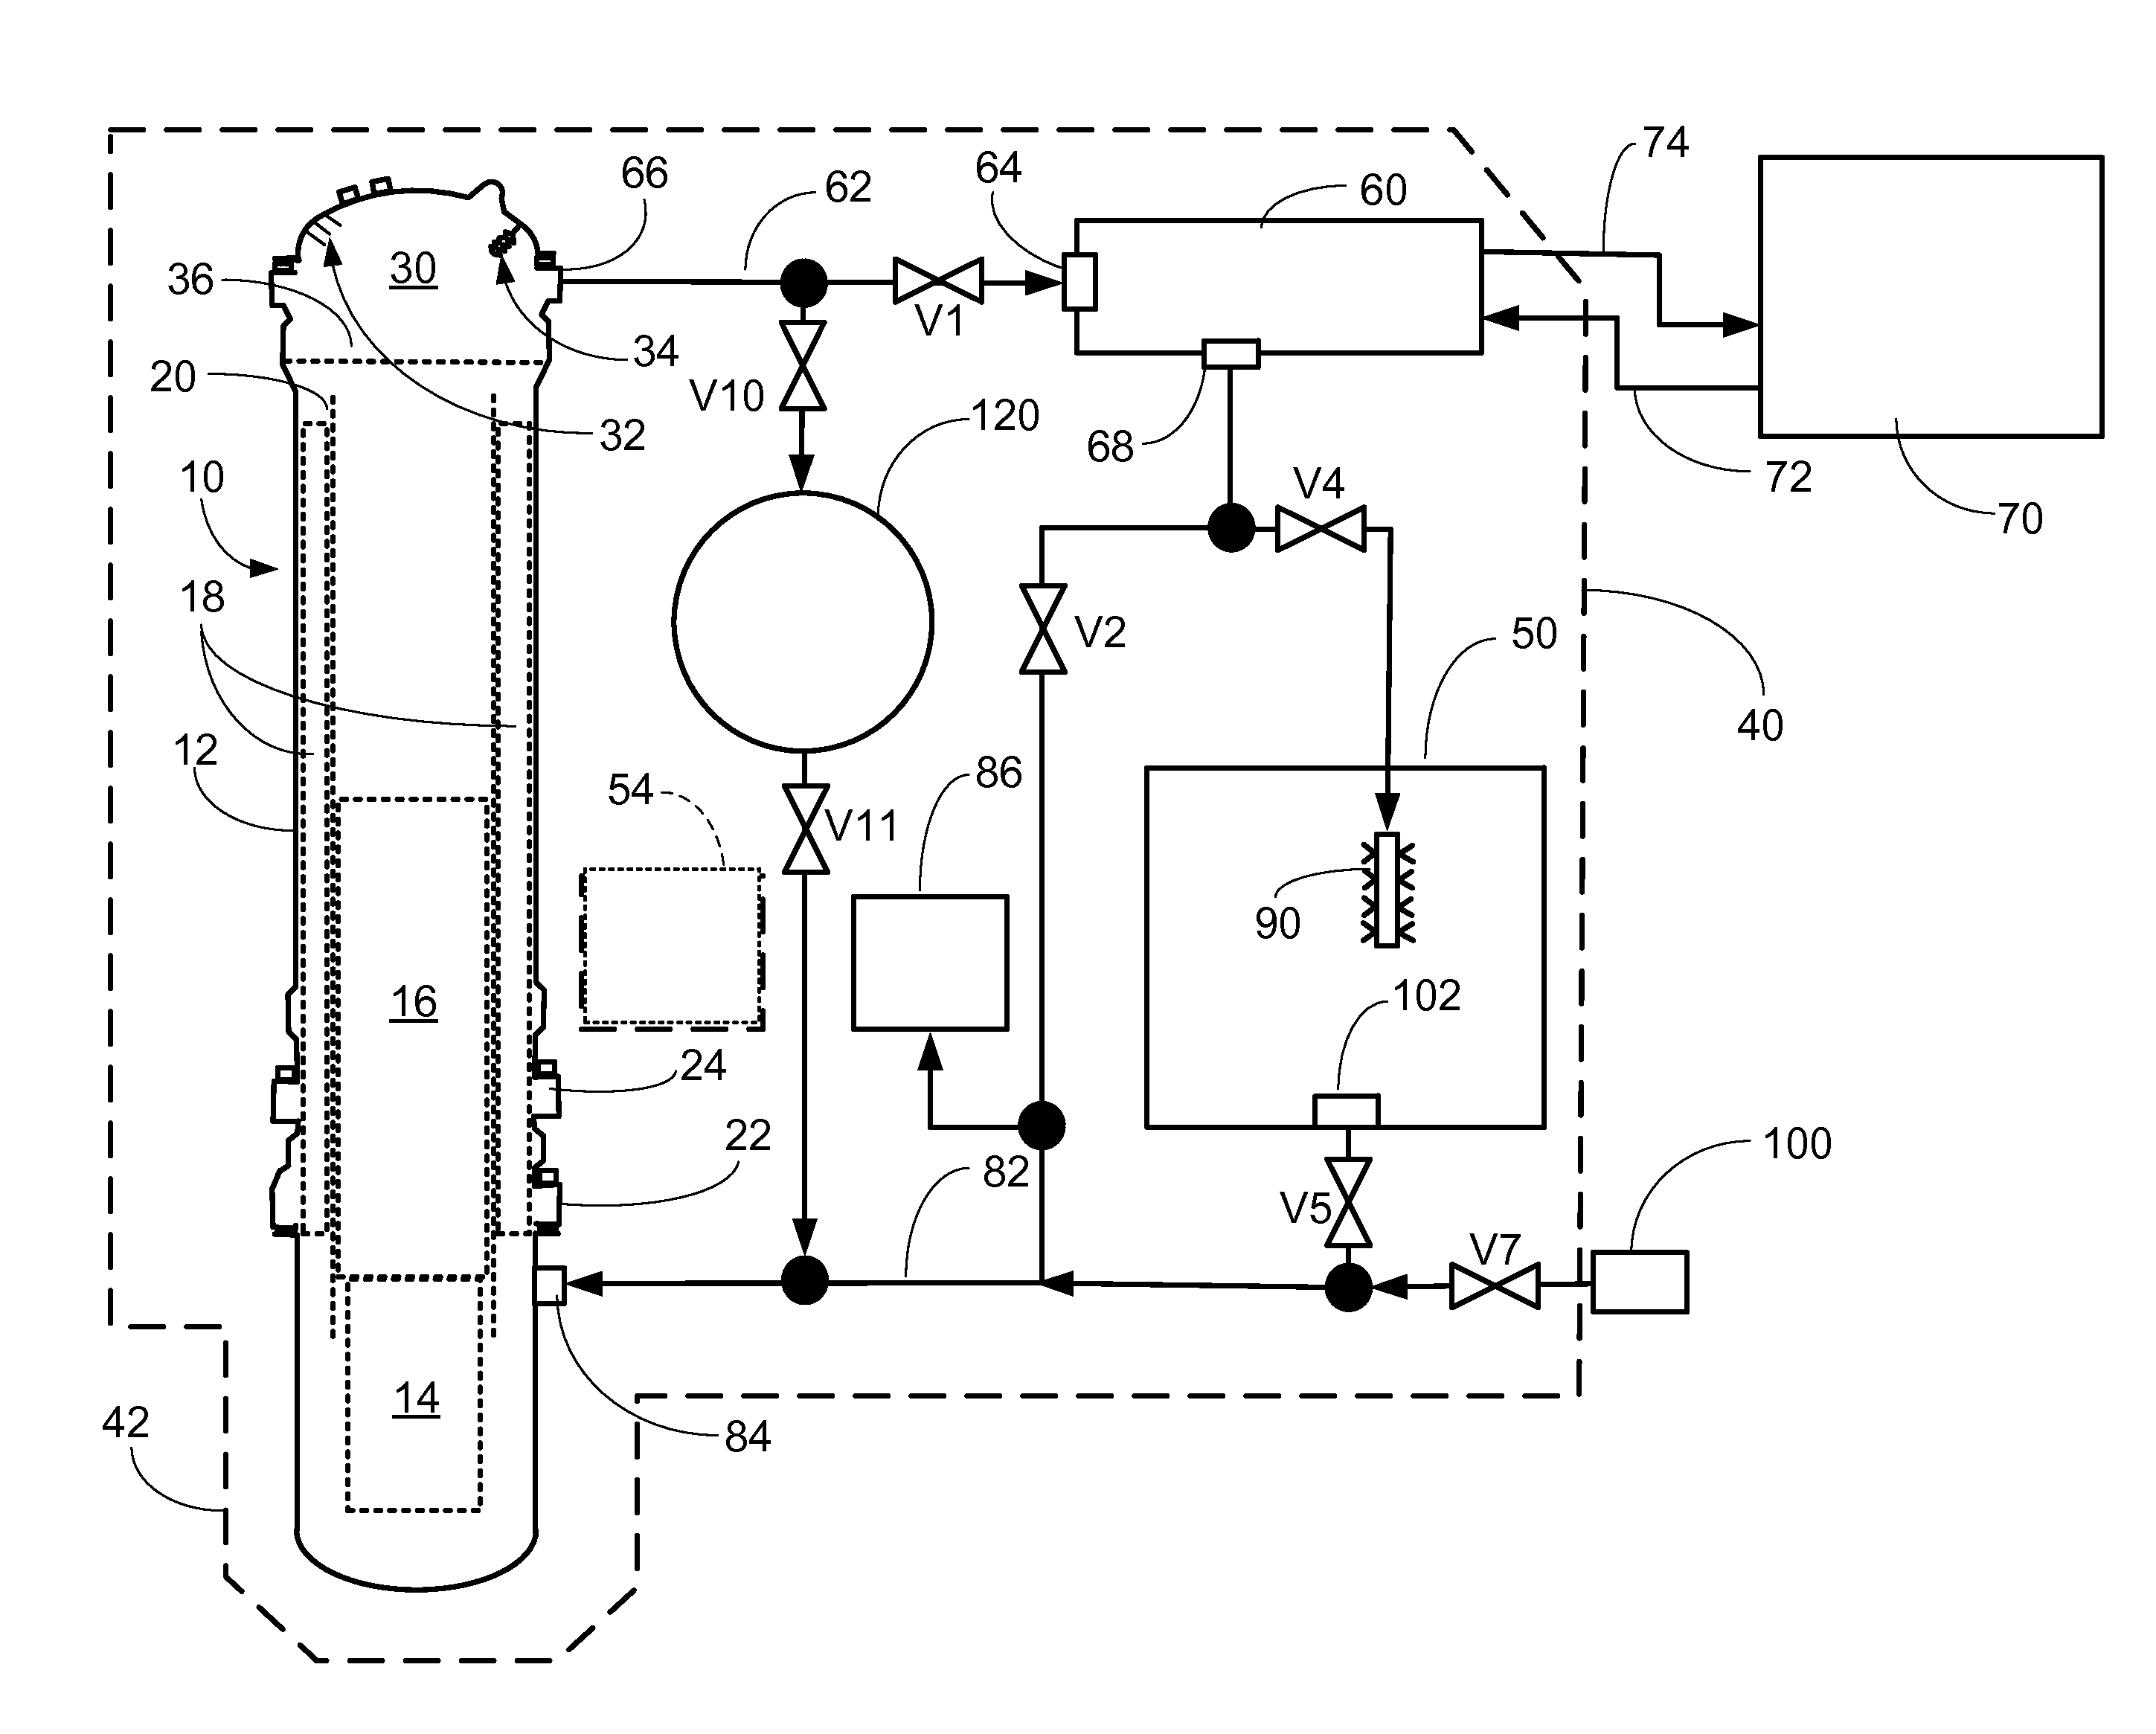 Emergency core cooling system for pressurized water reactor